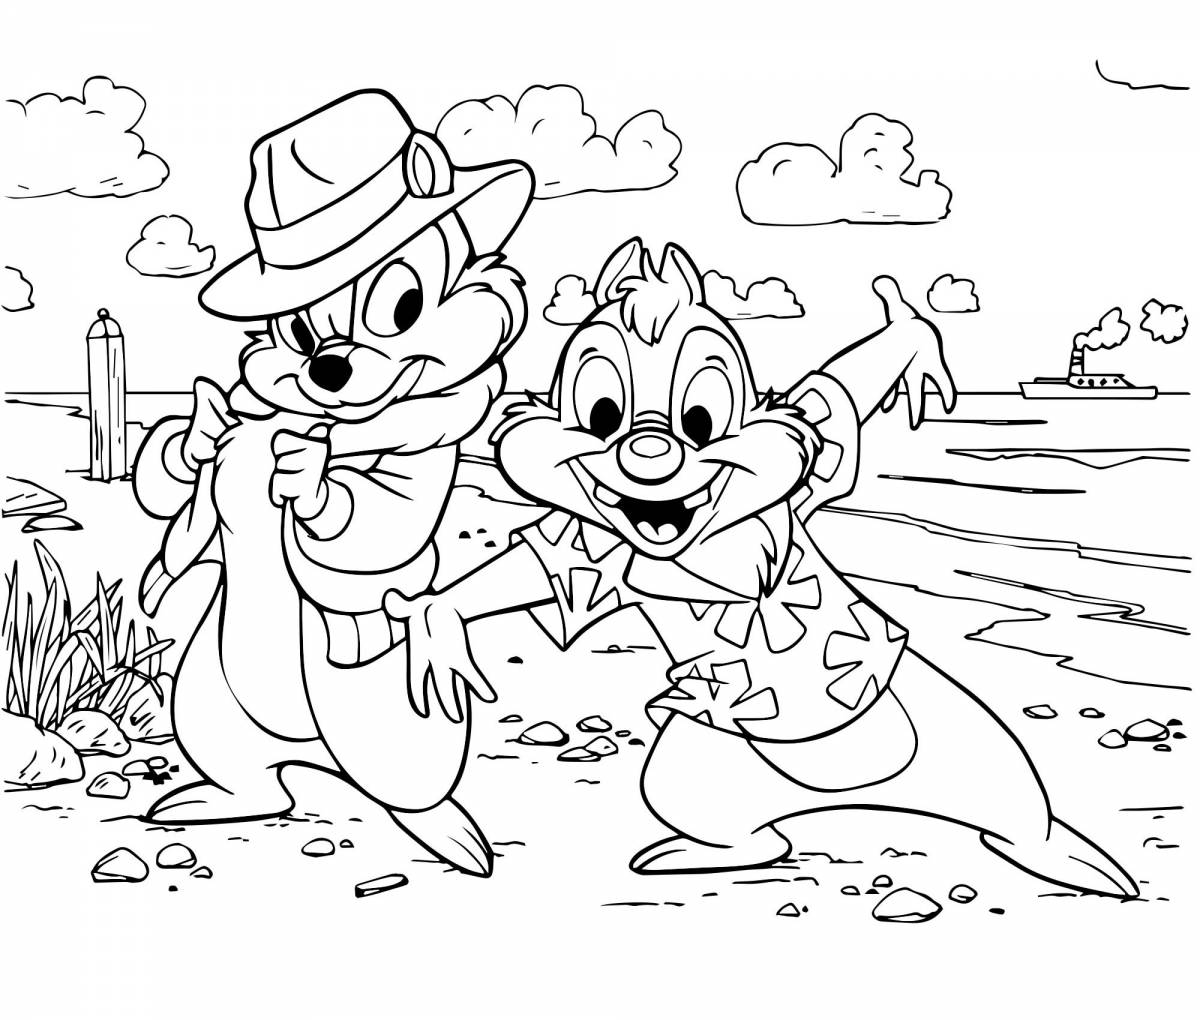 Coloring pages for kids with rich colors